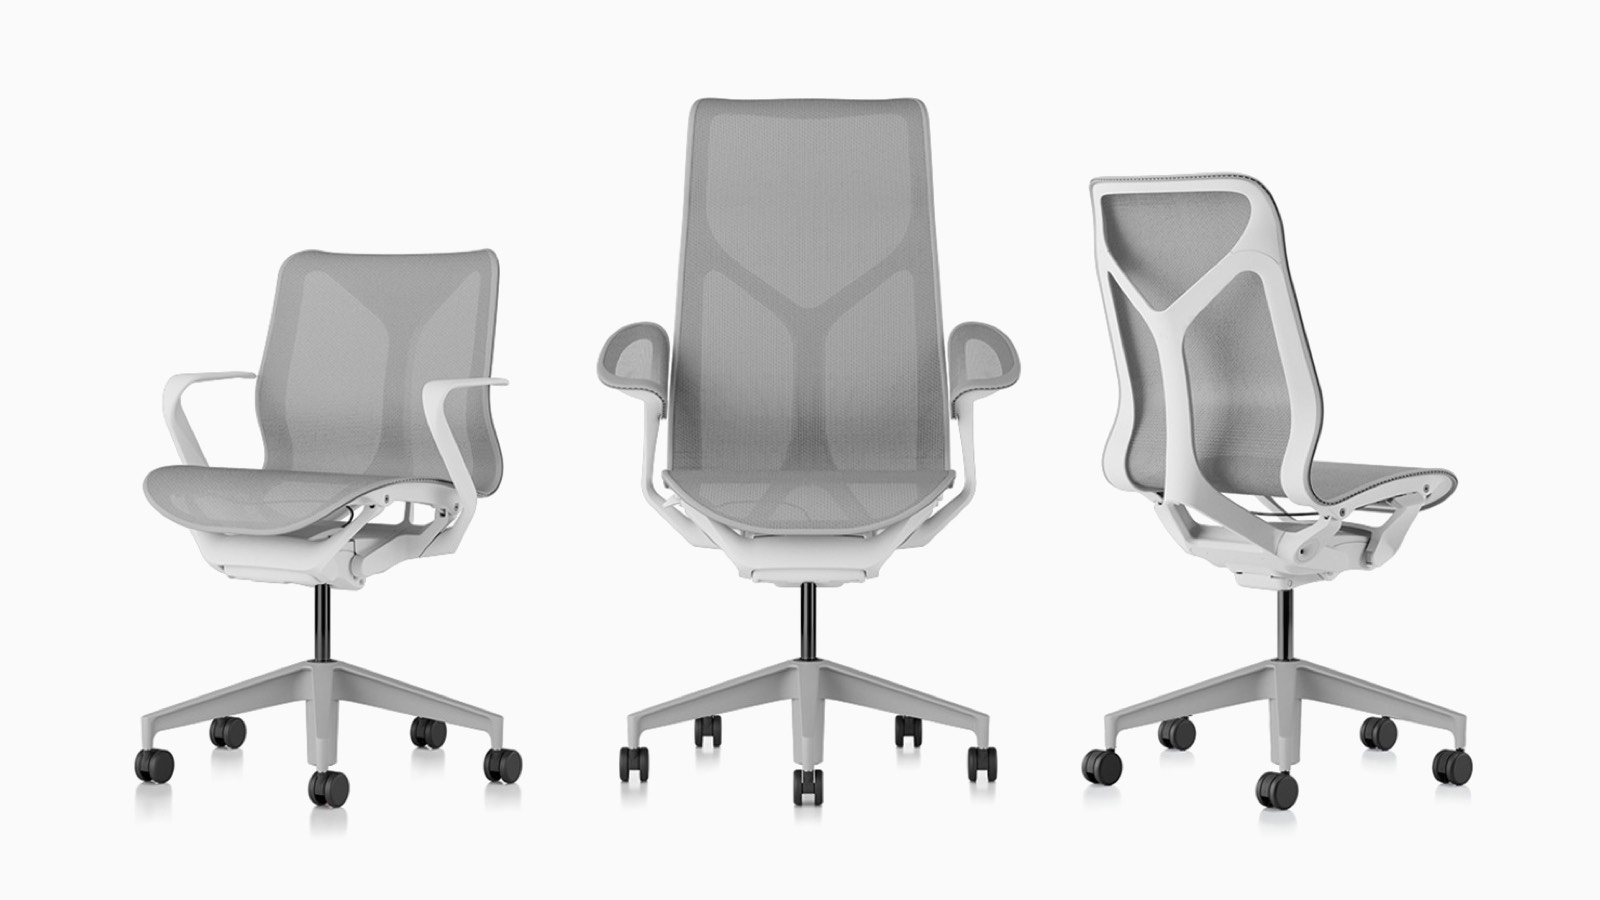 Low-back, high-back, and mid-back Cosm ergonomic desk chairs with bases and frames in Studio White and suspension materials in Mineral light grey.